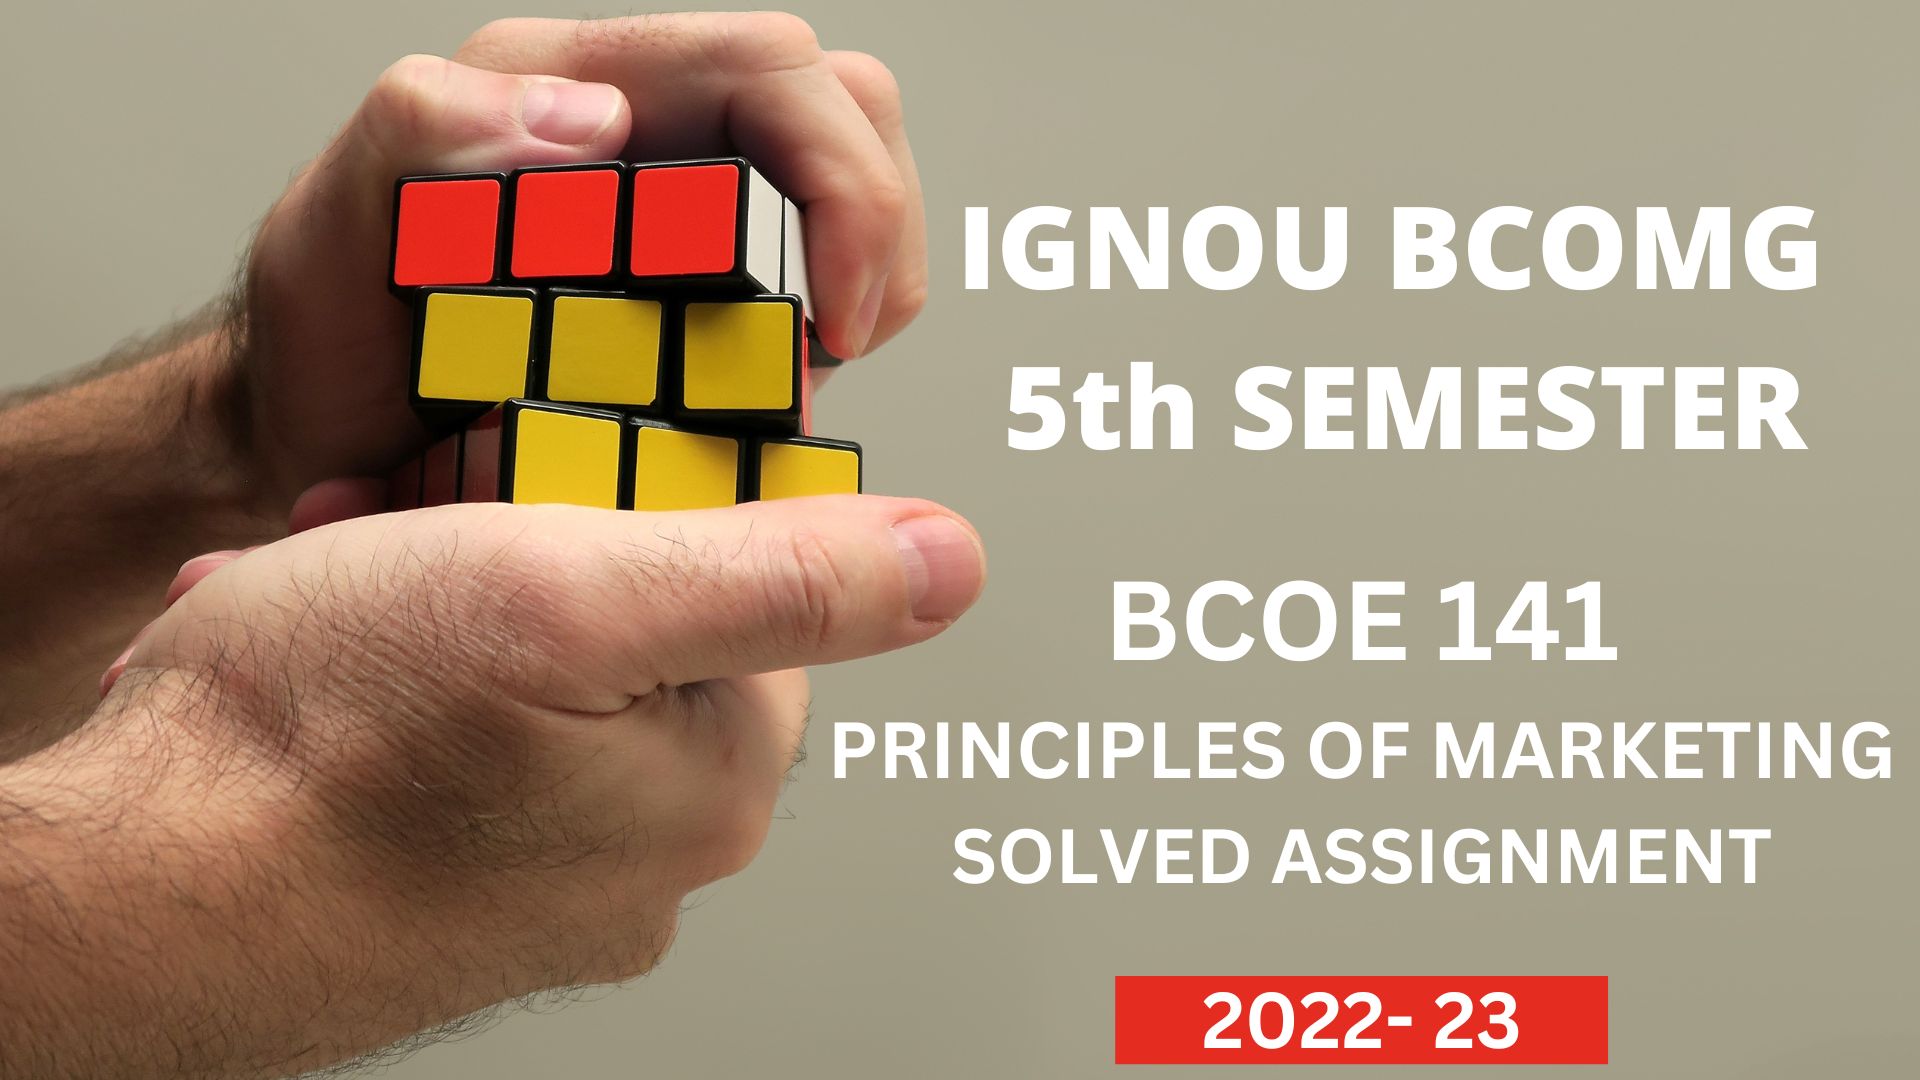 bcoe 141 solved assignment